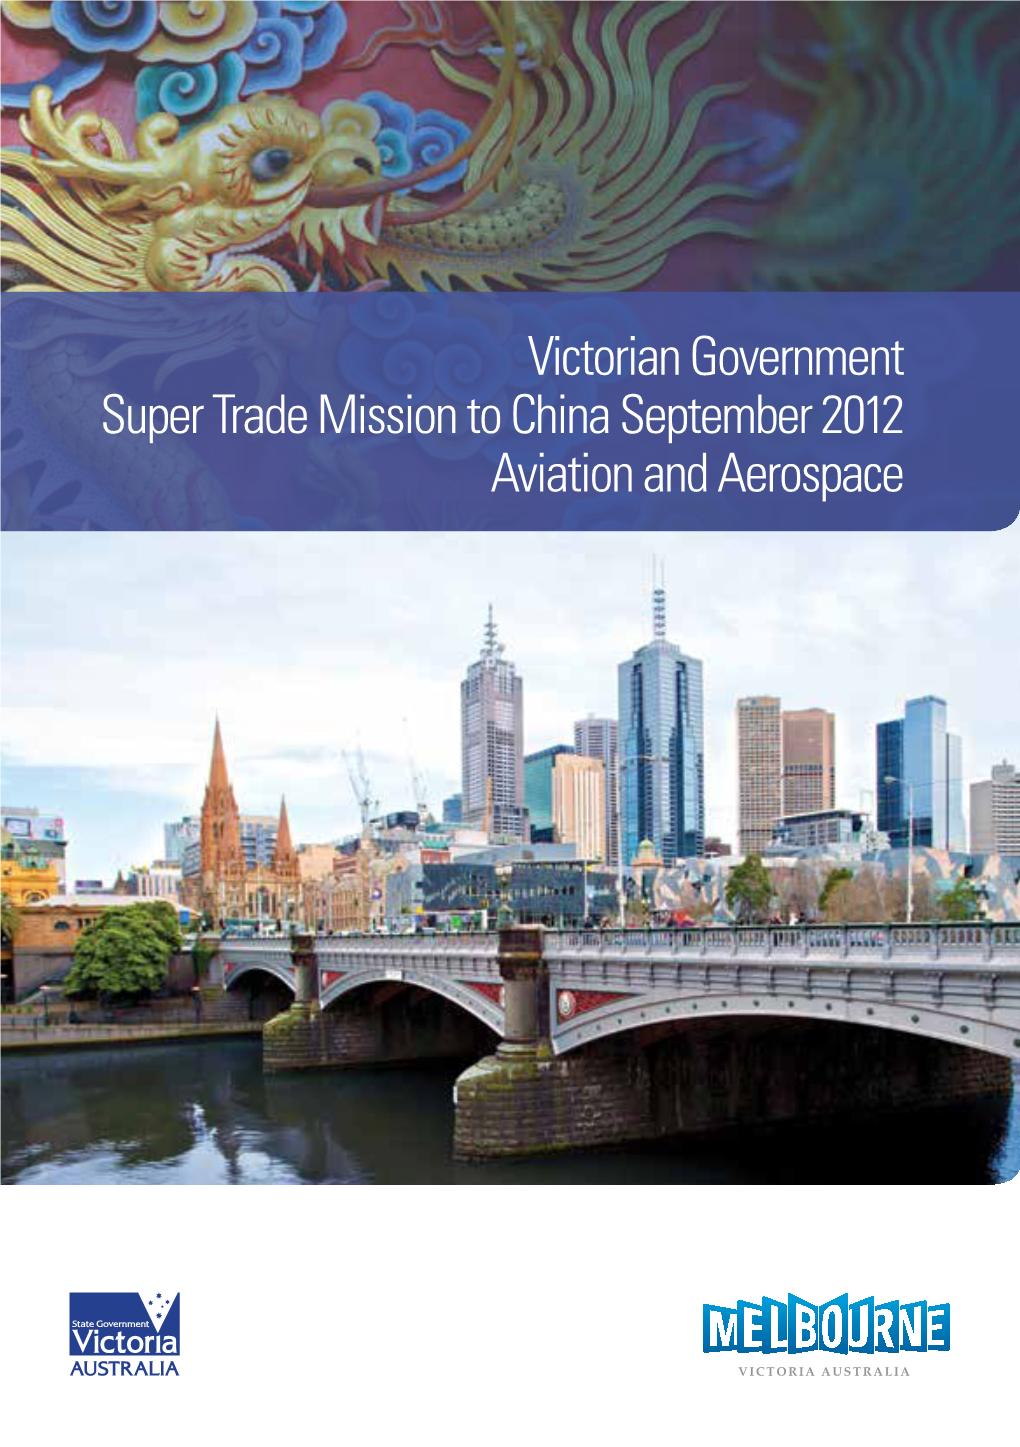 Victorian Government Super Trade Mission to China September 2012 Aviation and Aerospace Contents